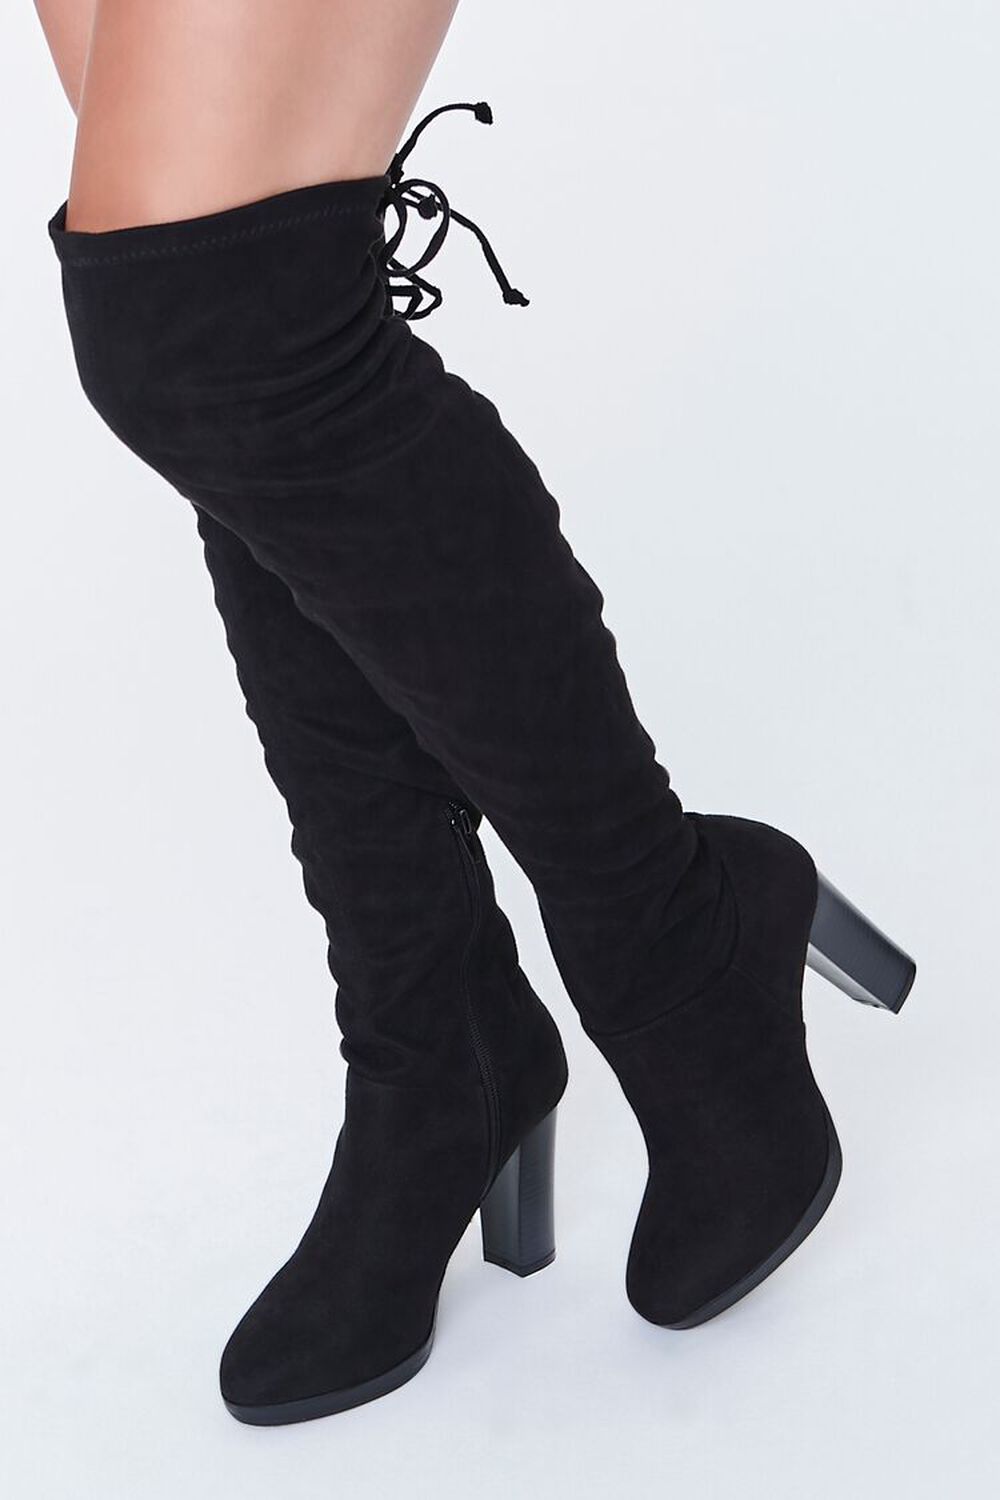 BLACK Faux Suede Bow Thigh-High Boots, image 1